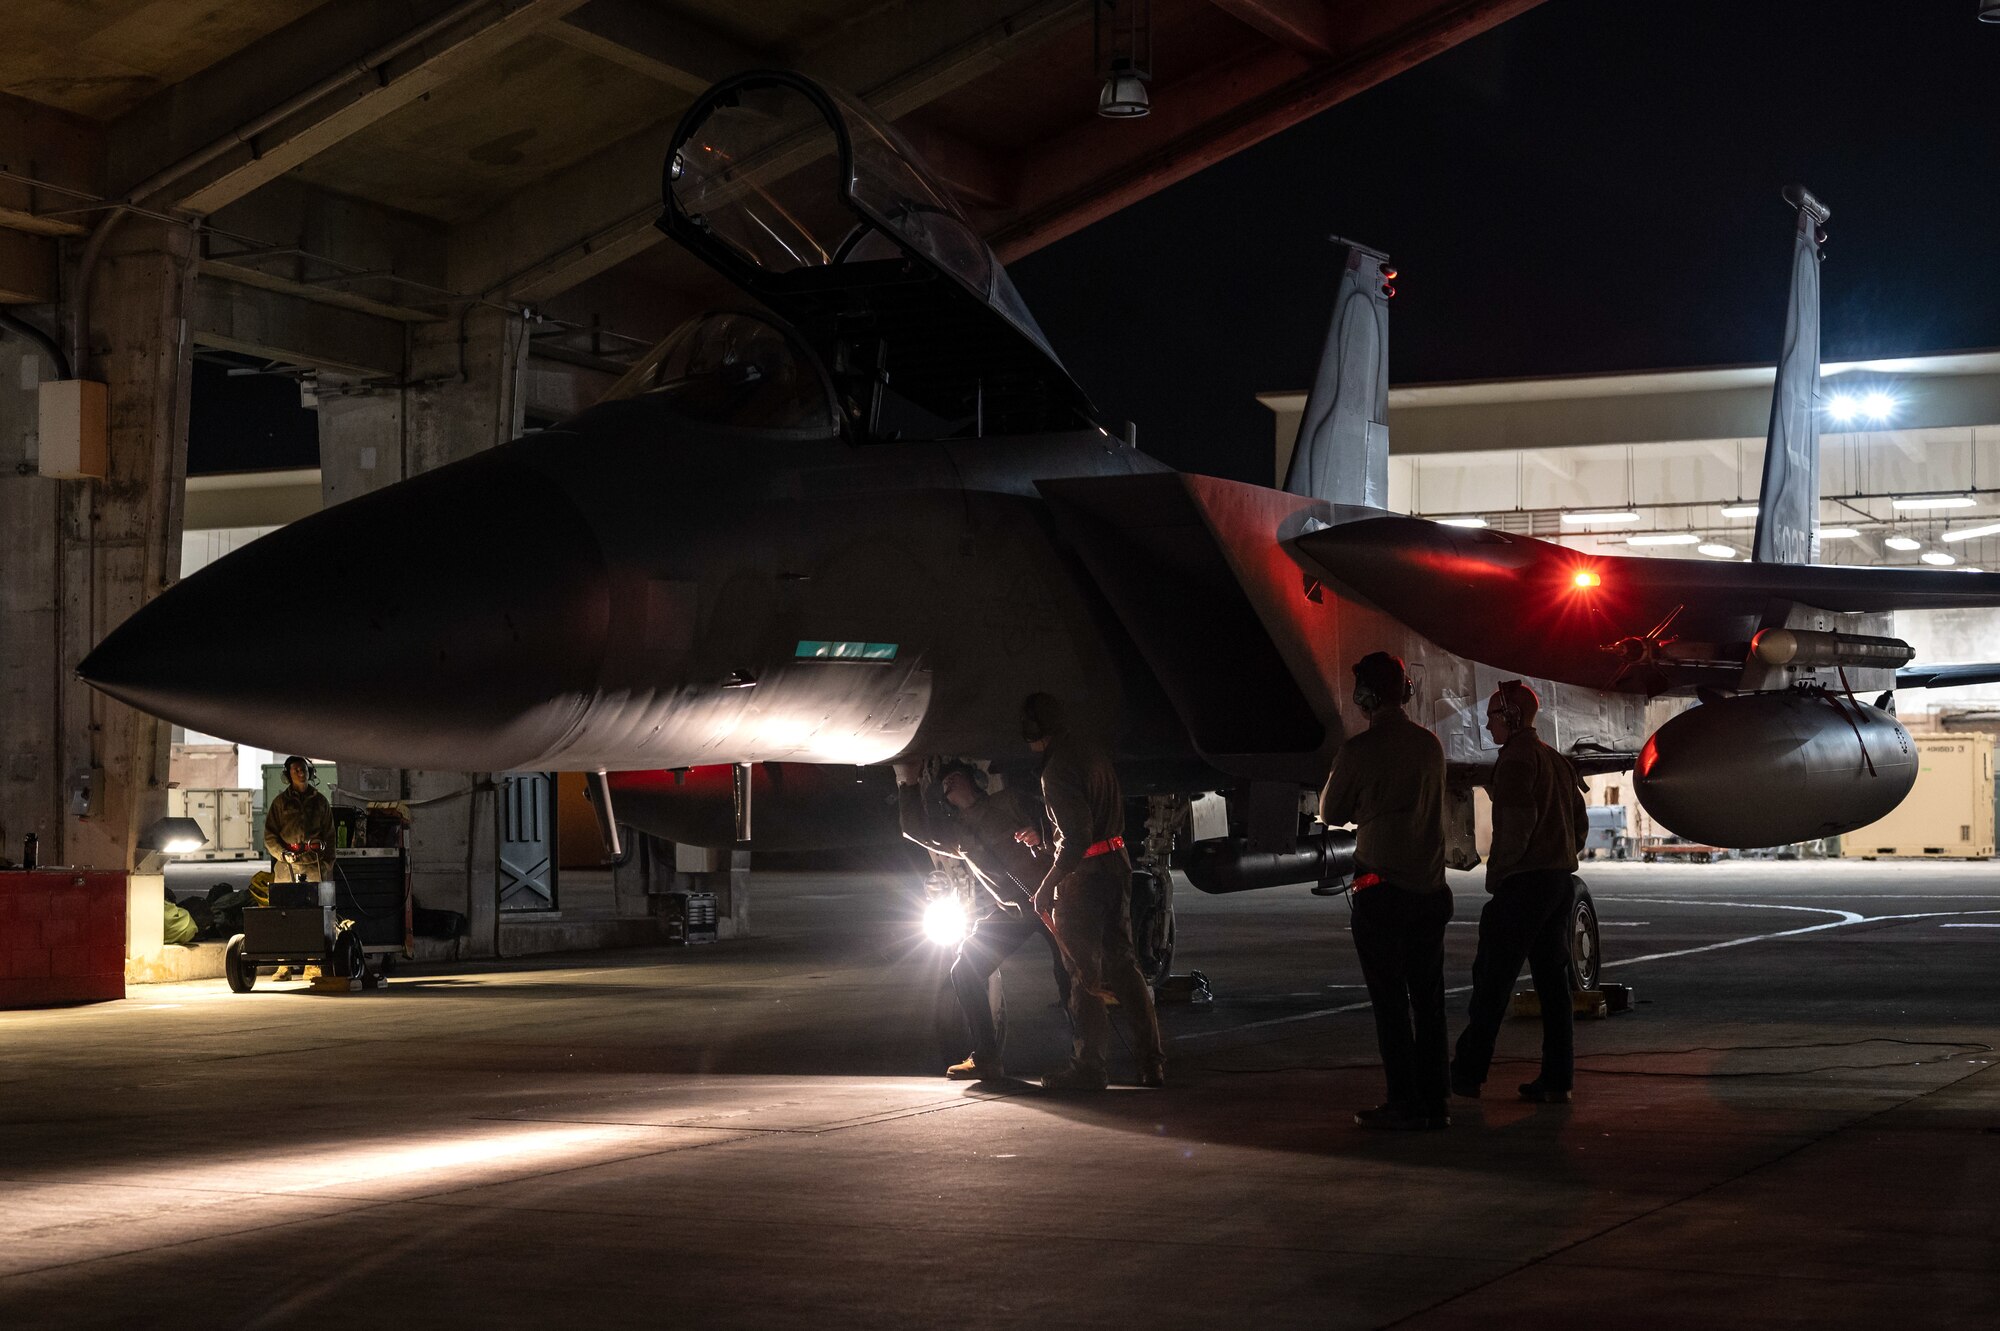 Four Airmen prepare to launch an F-15 at night.